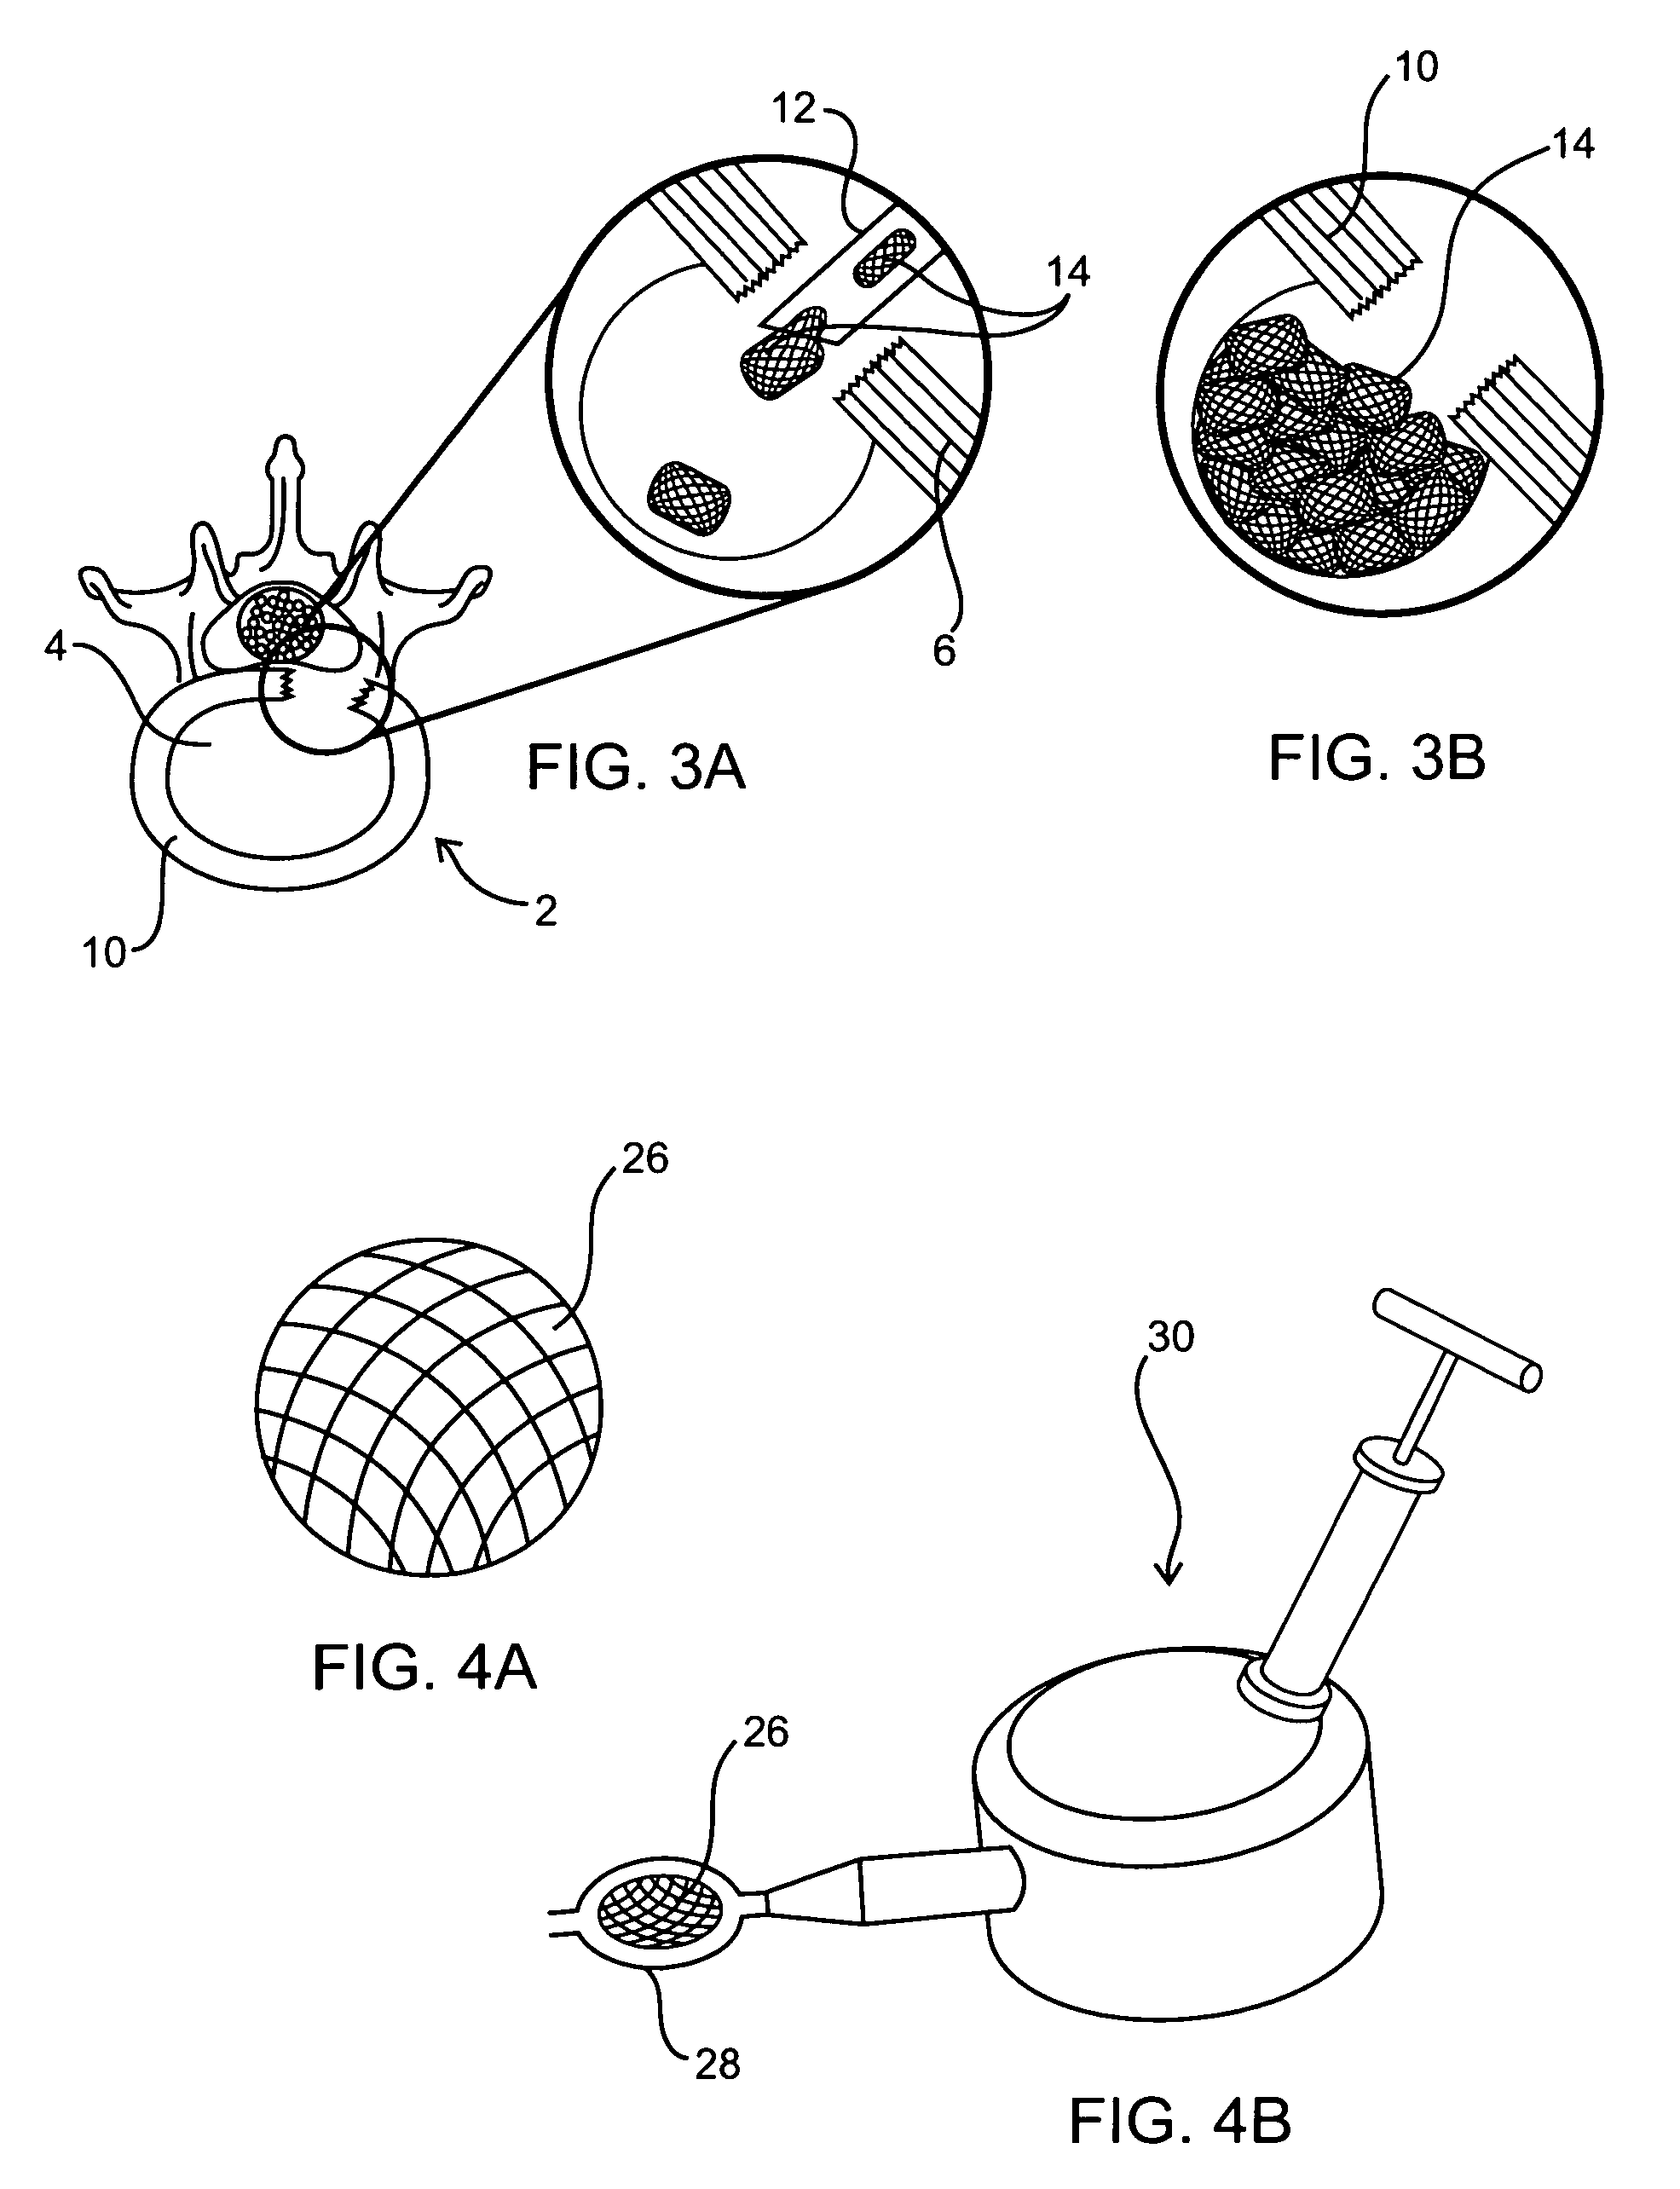 Fabrication and use of biocompatible materials for treating and repairing herniated spinal discs